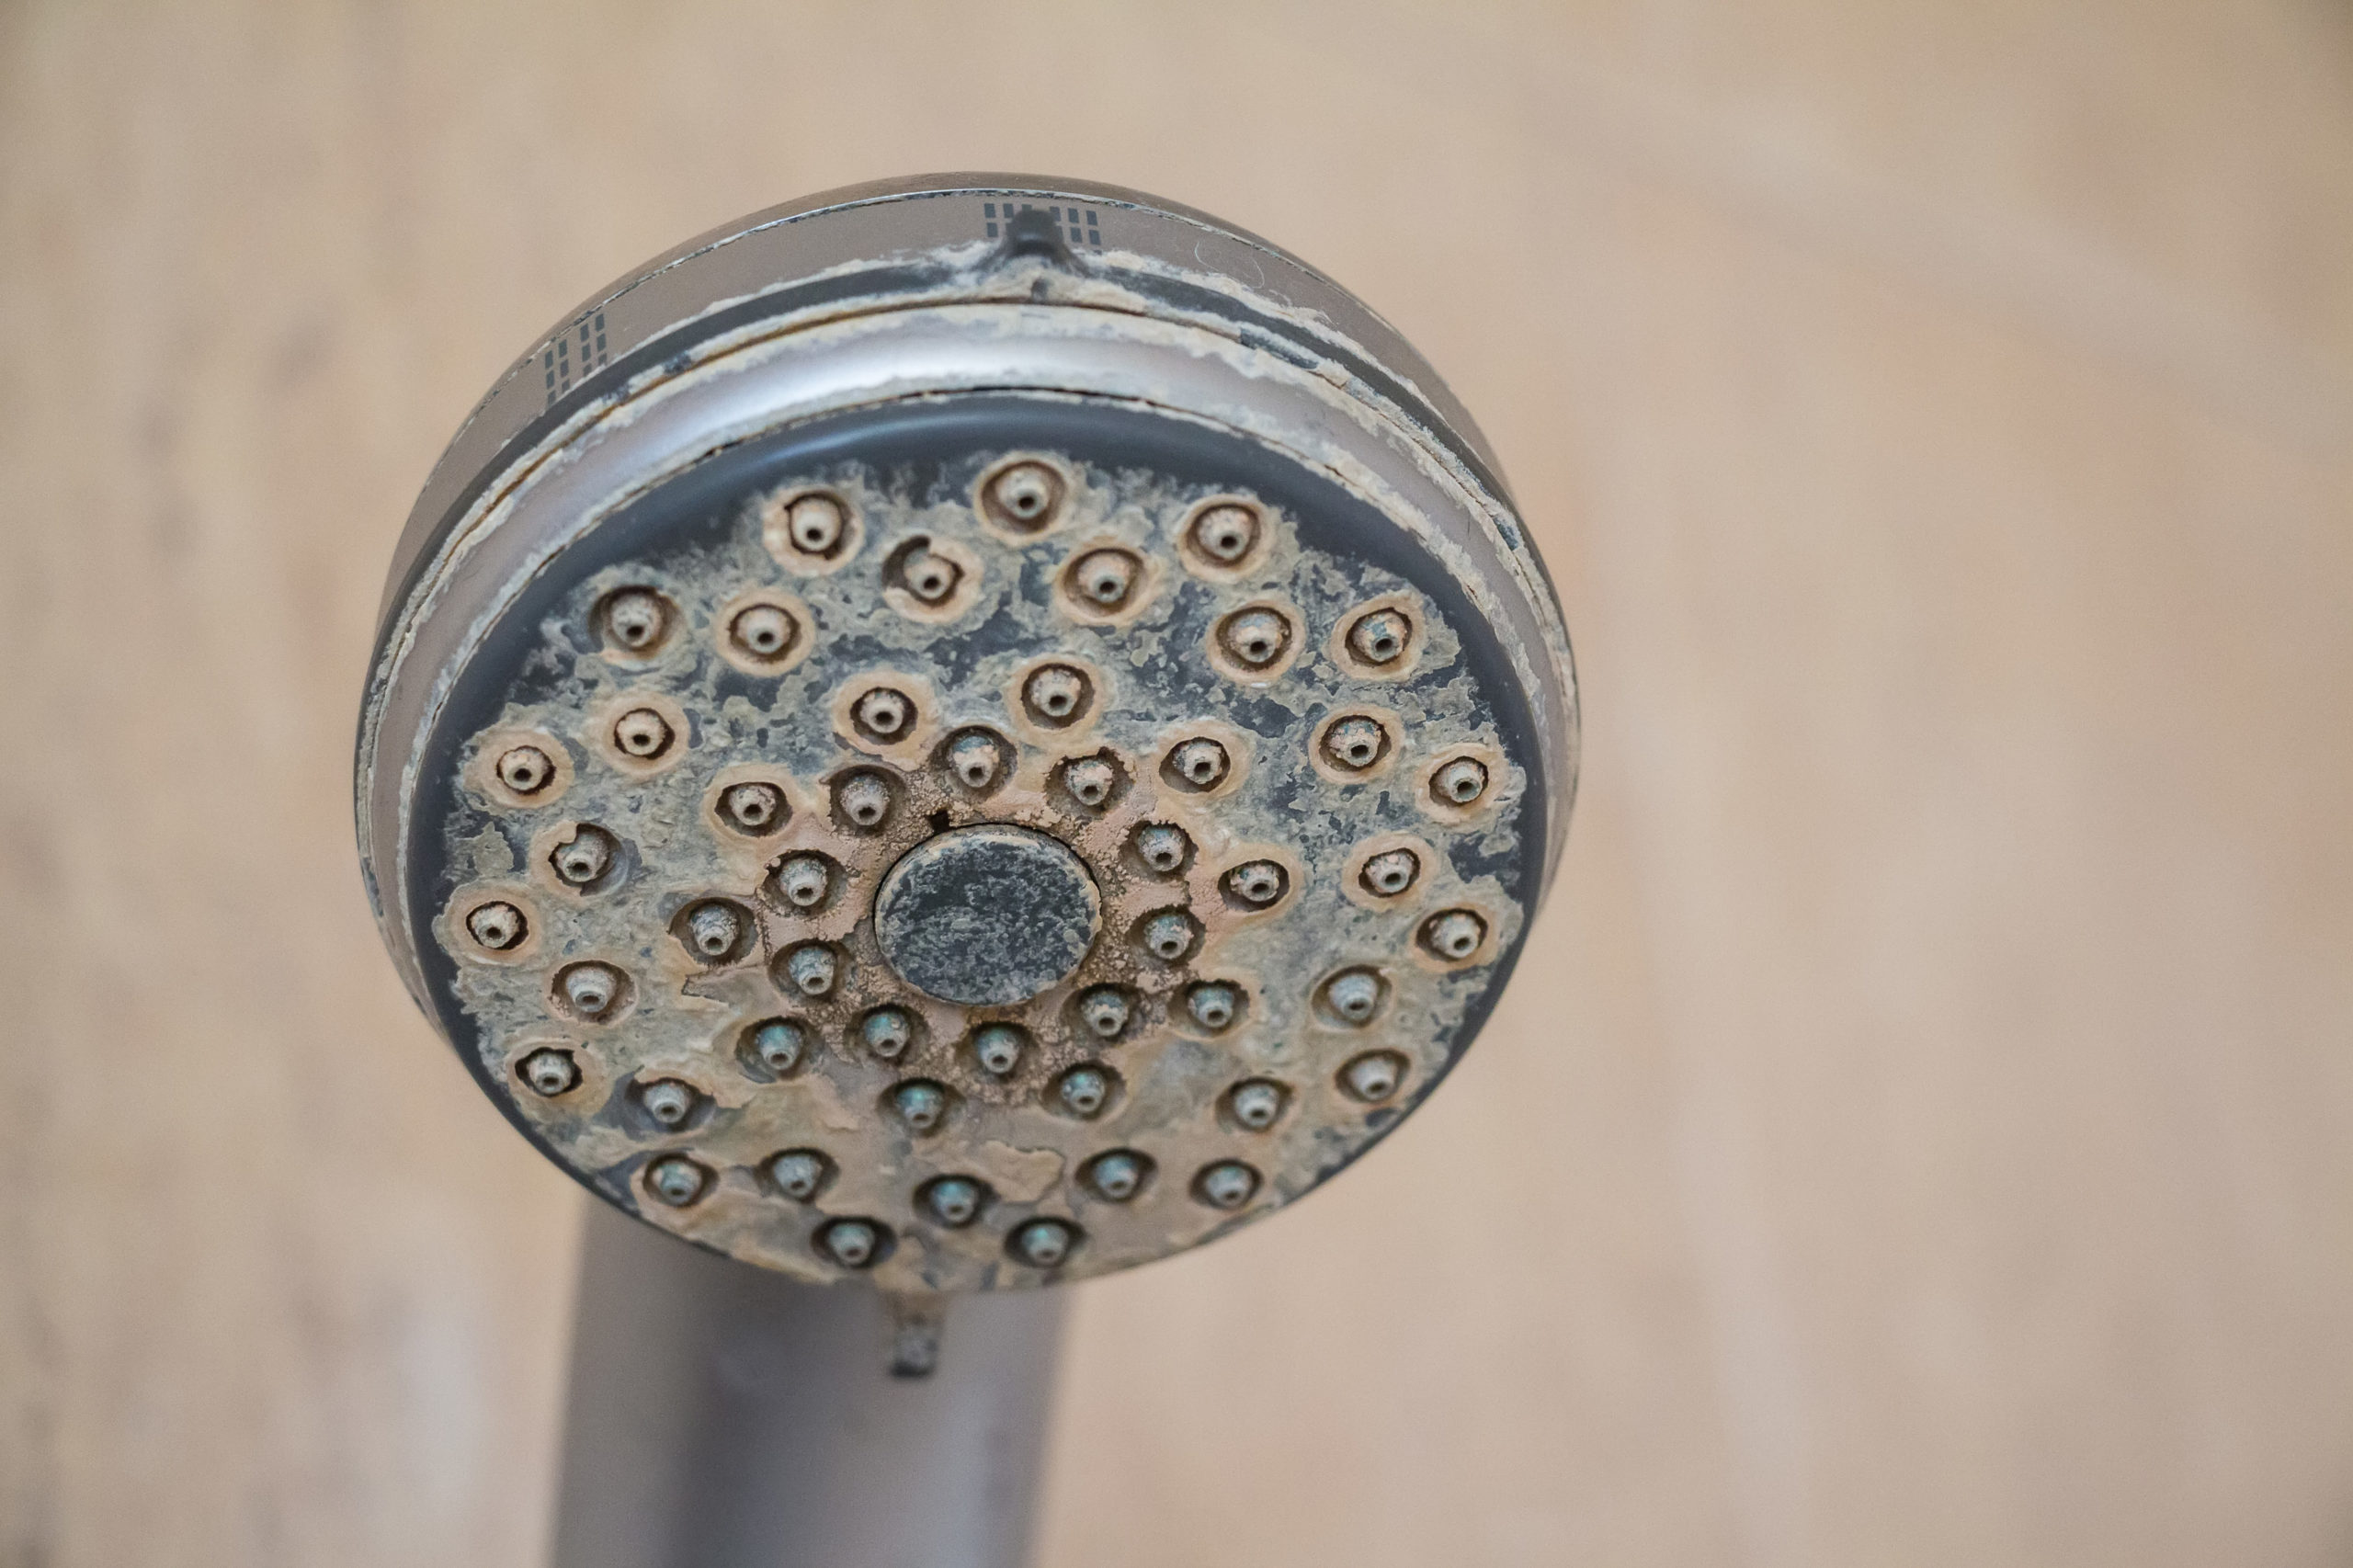 How to Remove Hard Water Stains From Your Plumbing Fixtures and